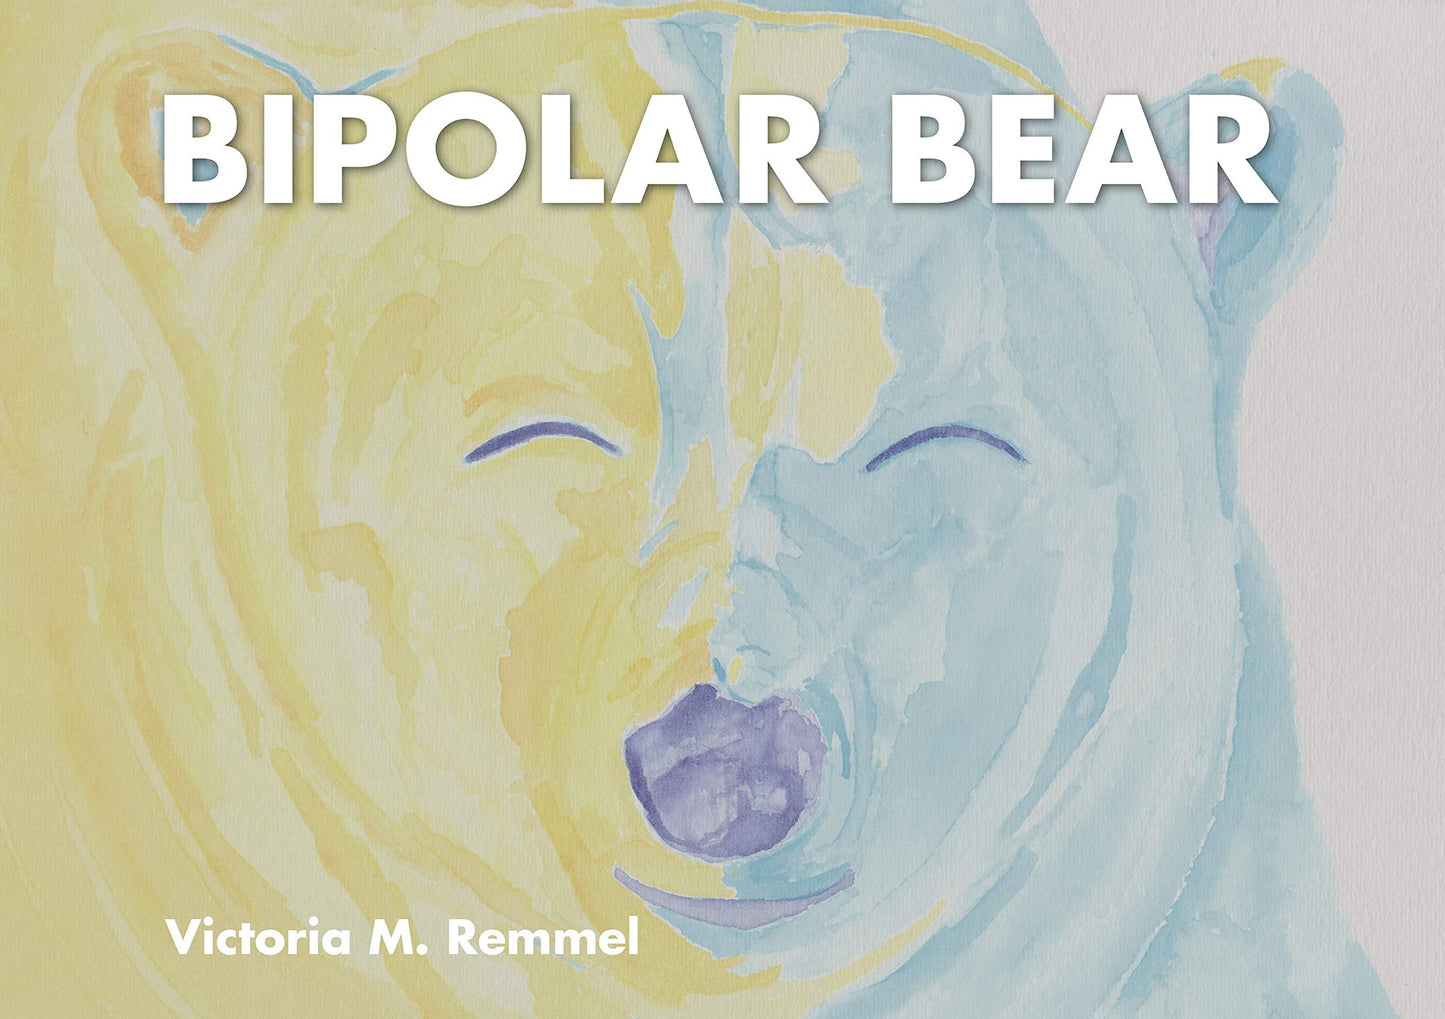 Bipolar Bear: A Resource to Talk about Mental Health